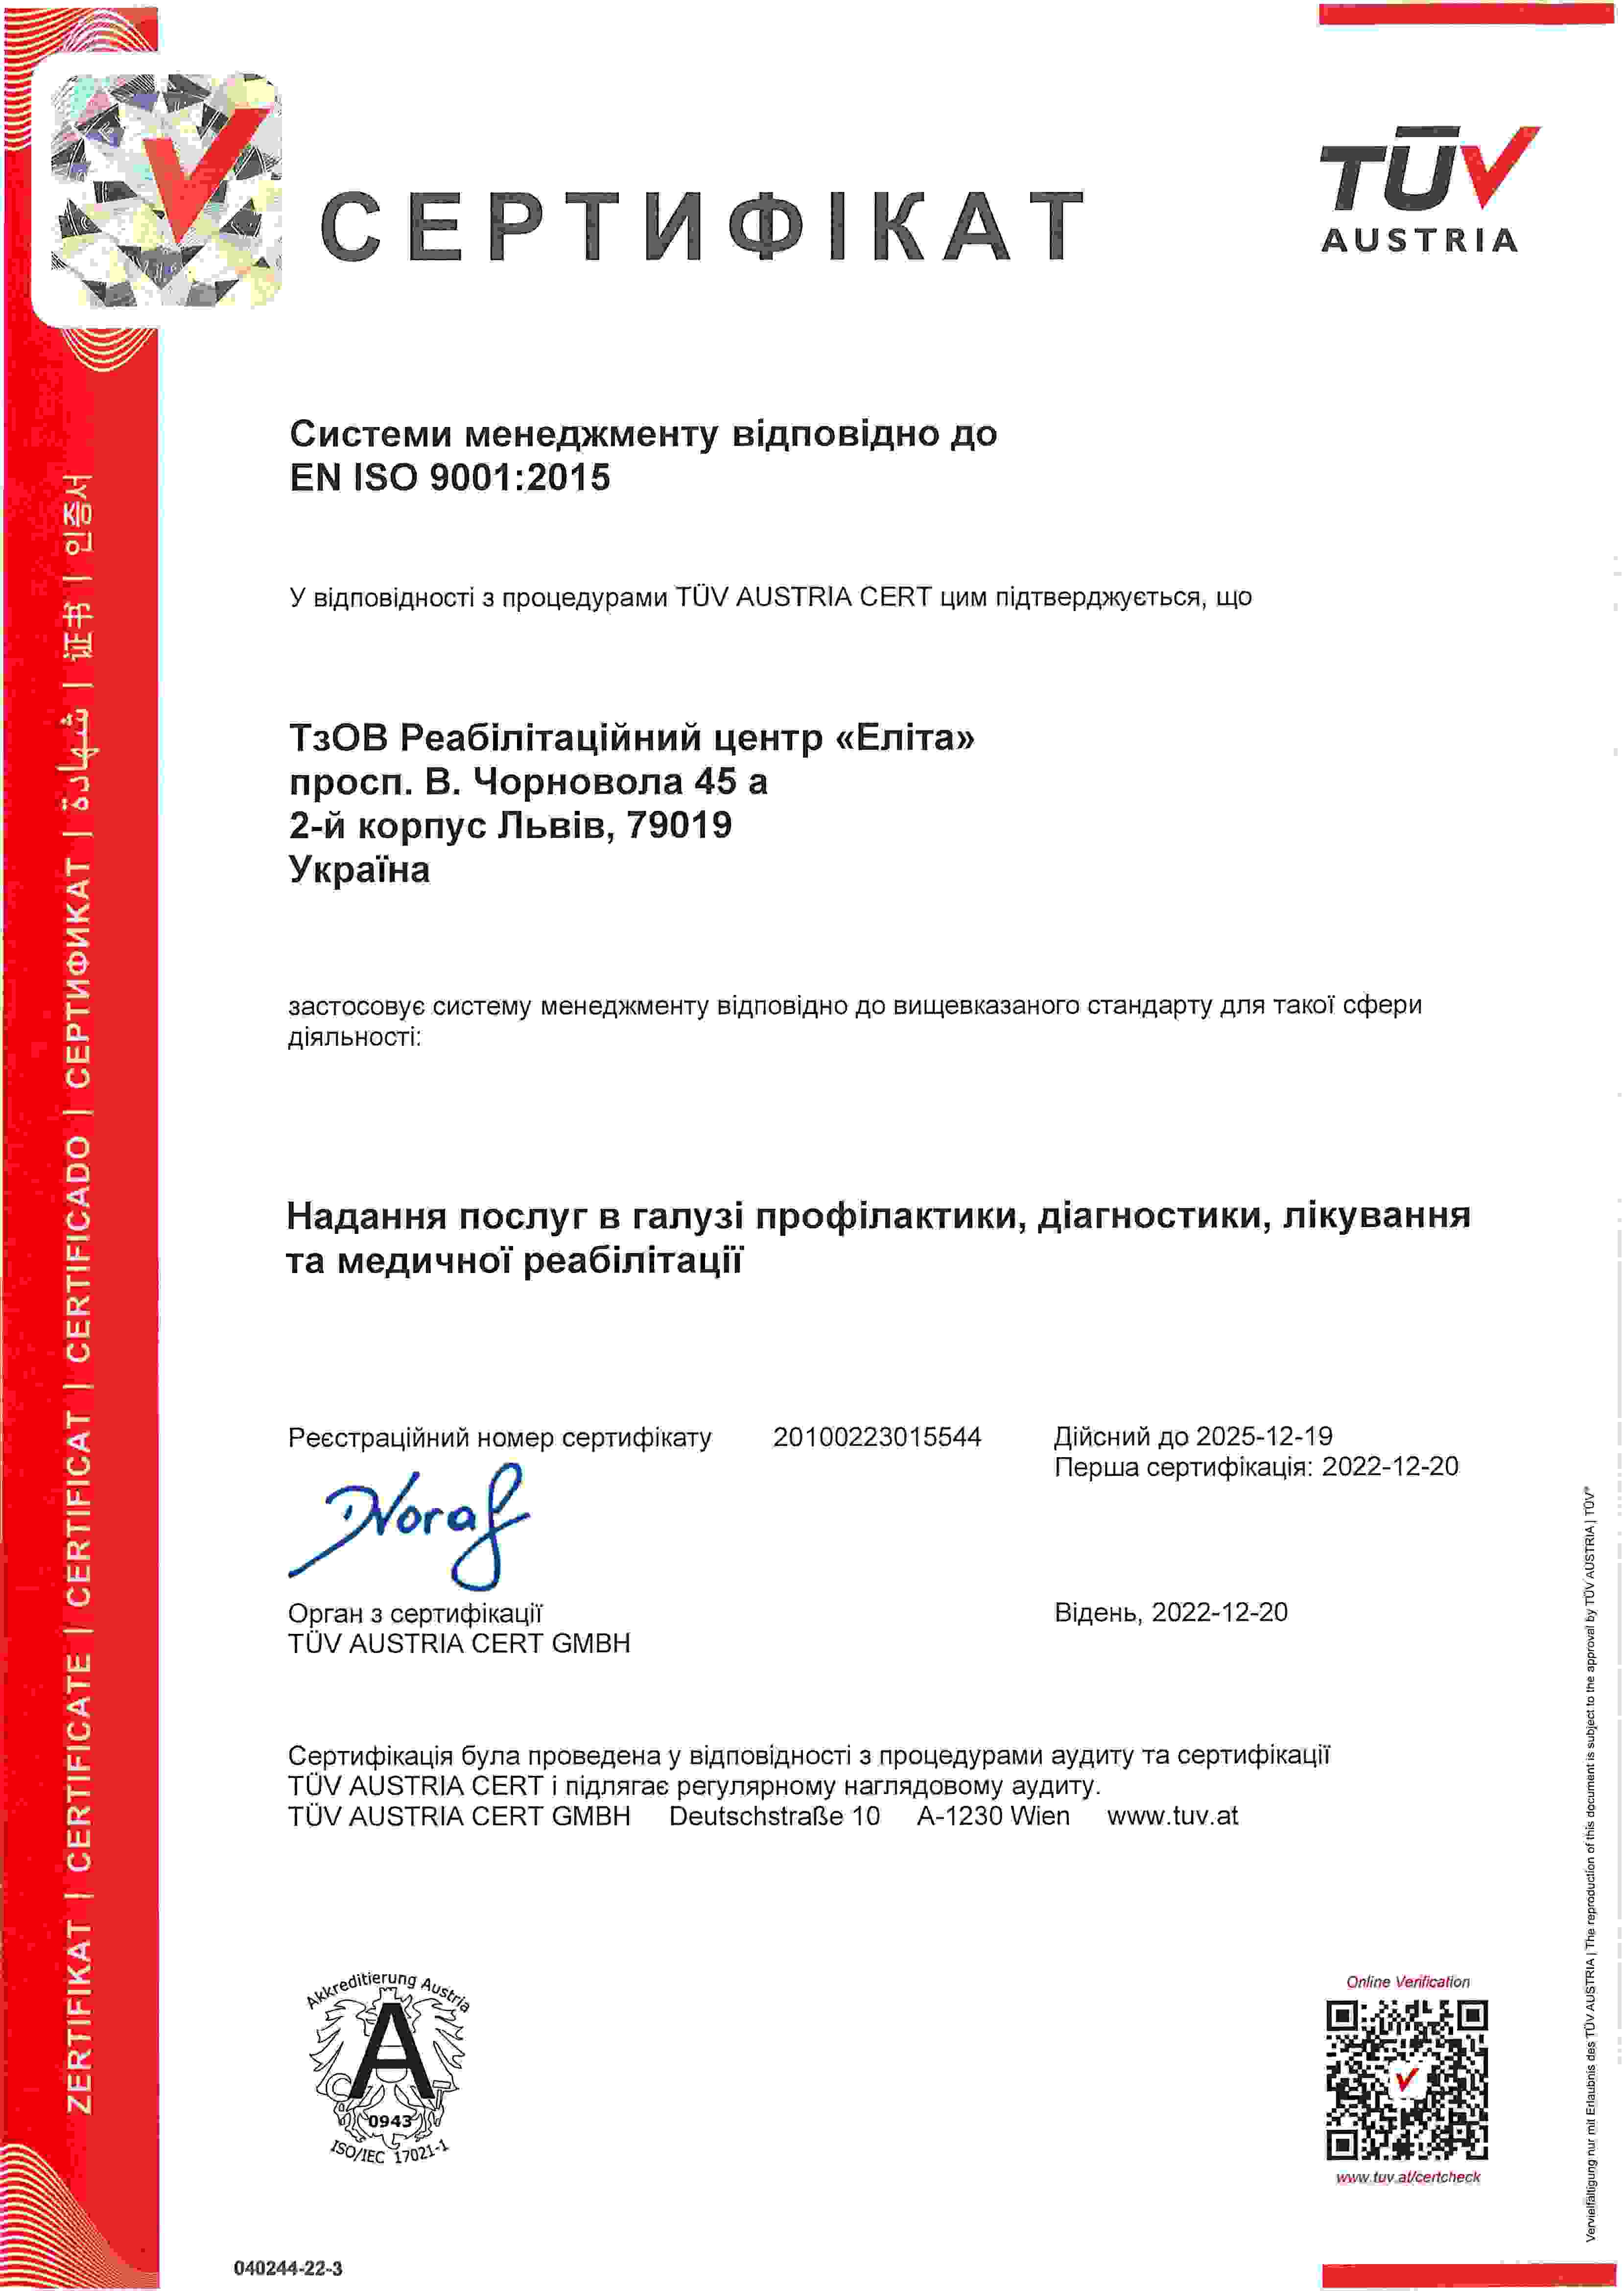 ISO 9001:2015 